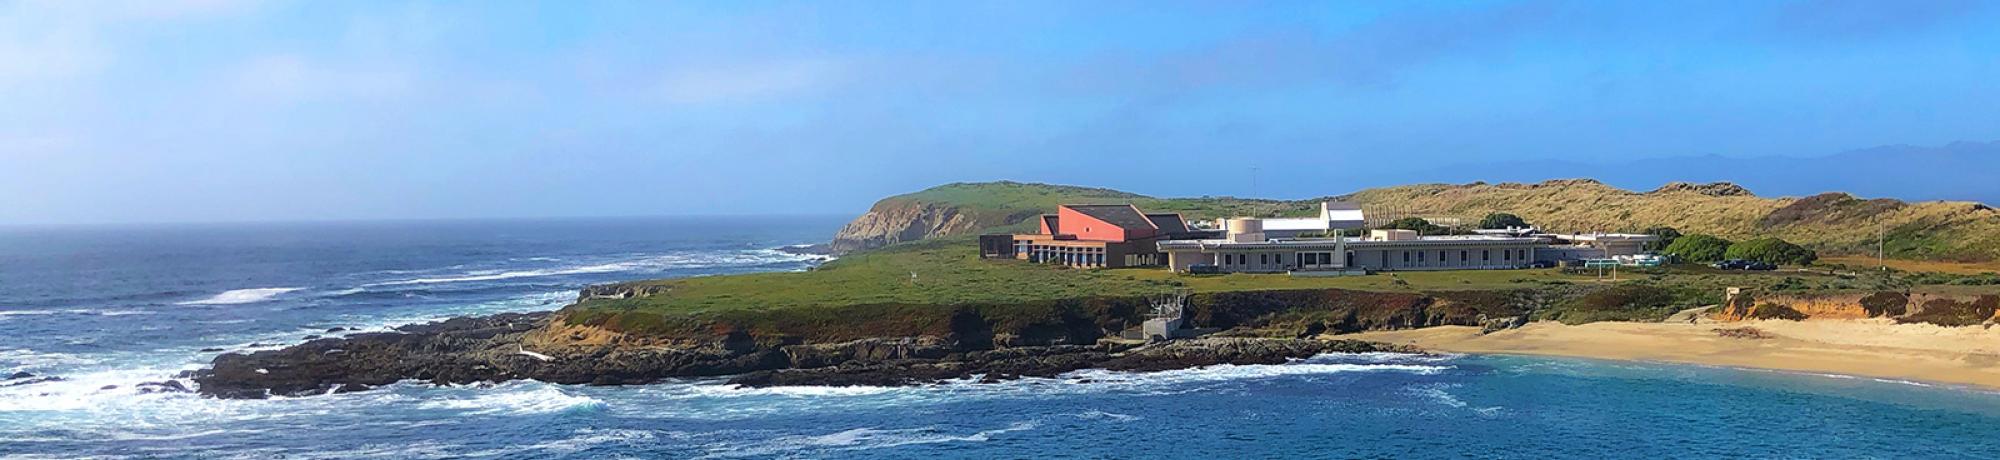 View of Bodega Marine Laboratory with green grass visible in the foreground and the cove in front of the lab building, which is predominantly white with blue skies behind.